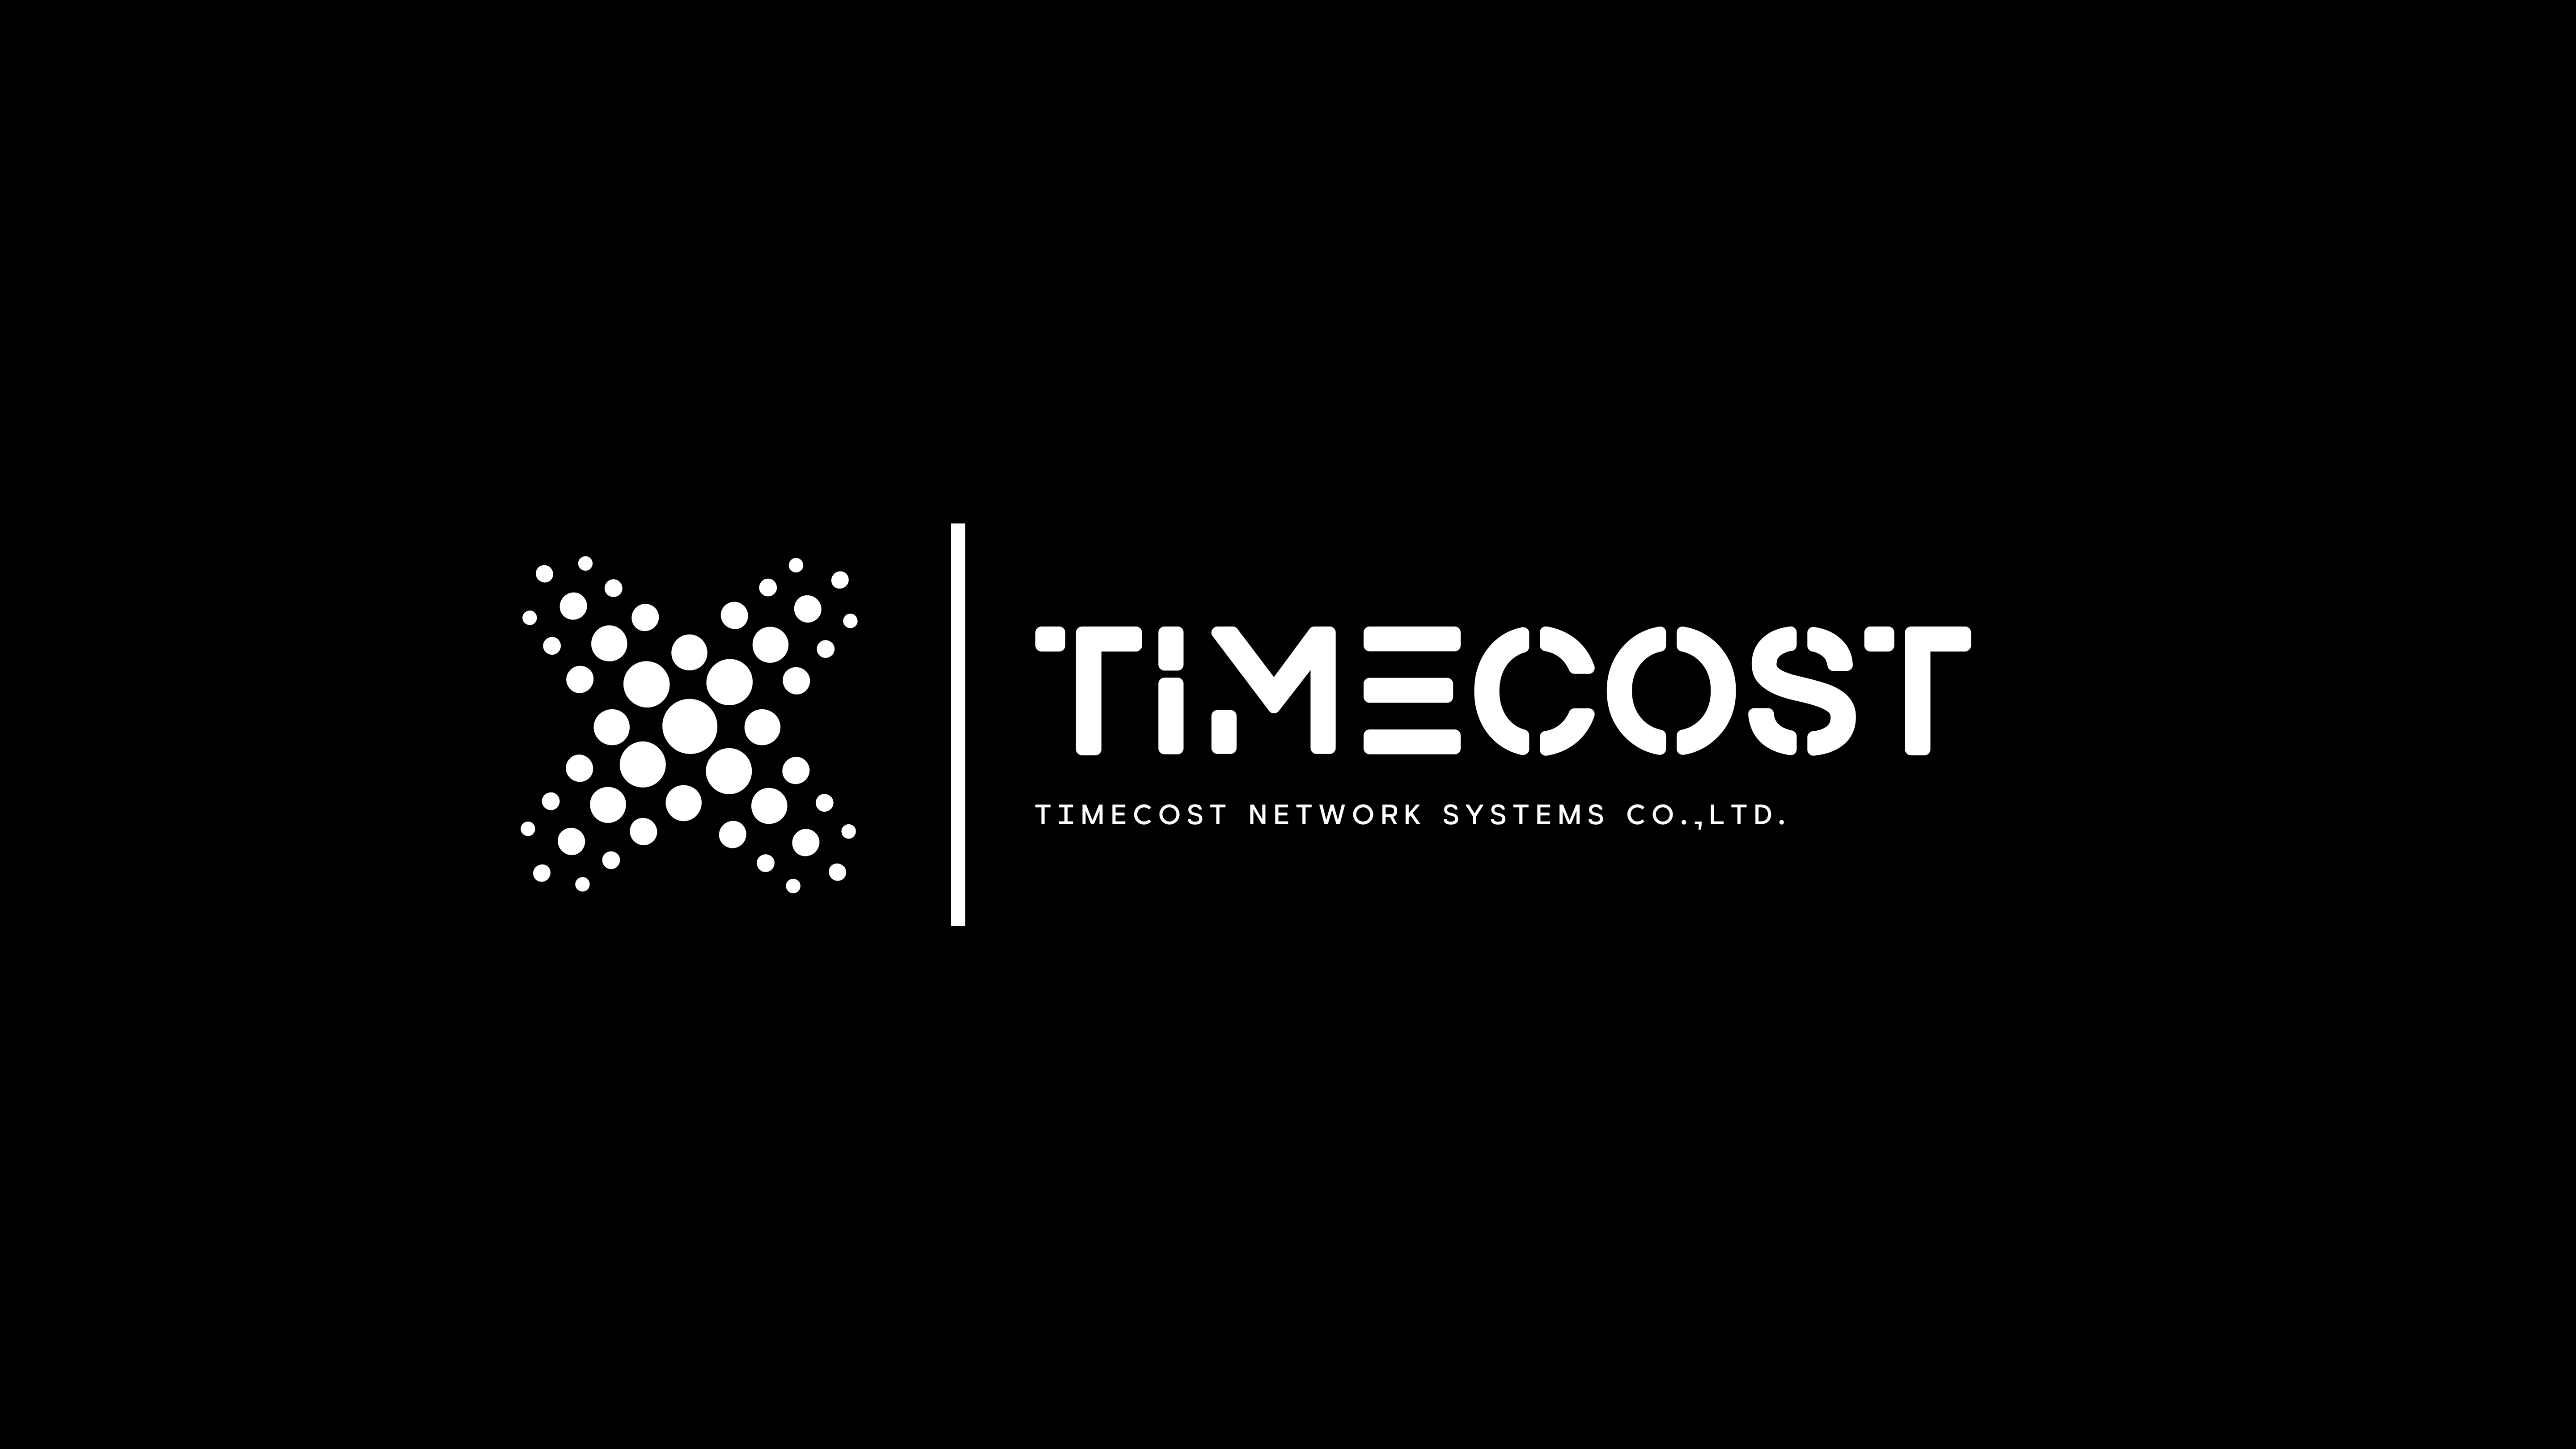 TimeCost Network Systems Co., Ltd.